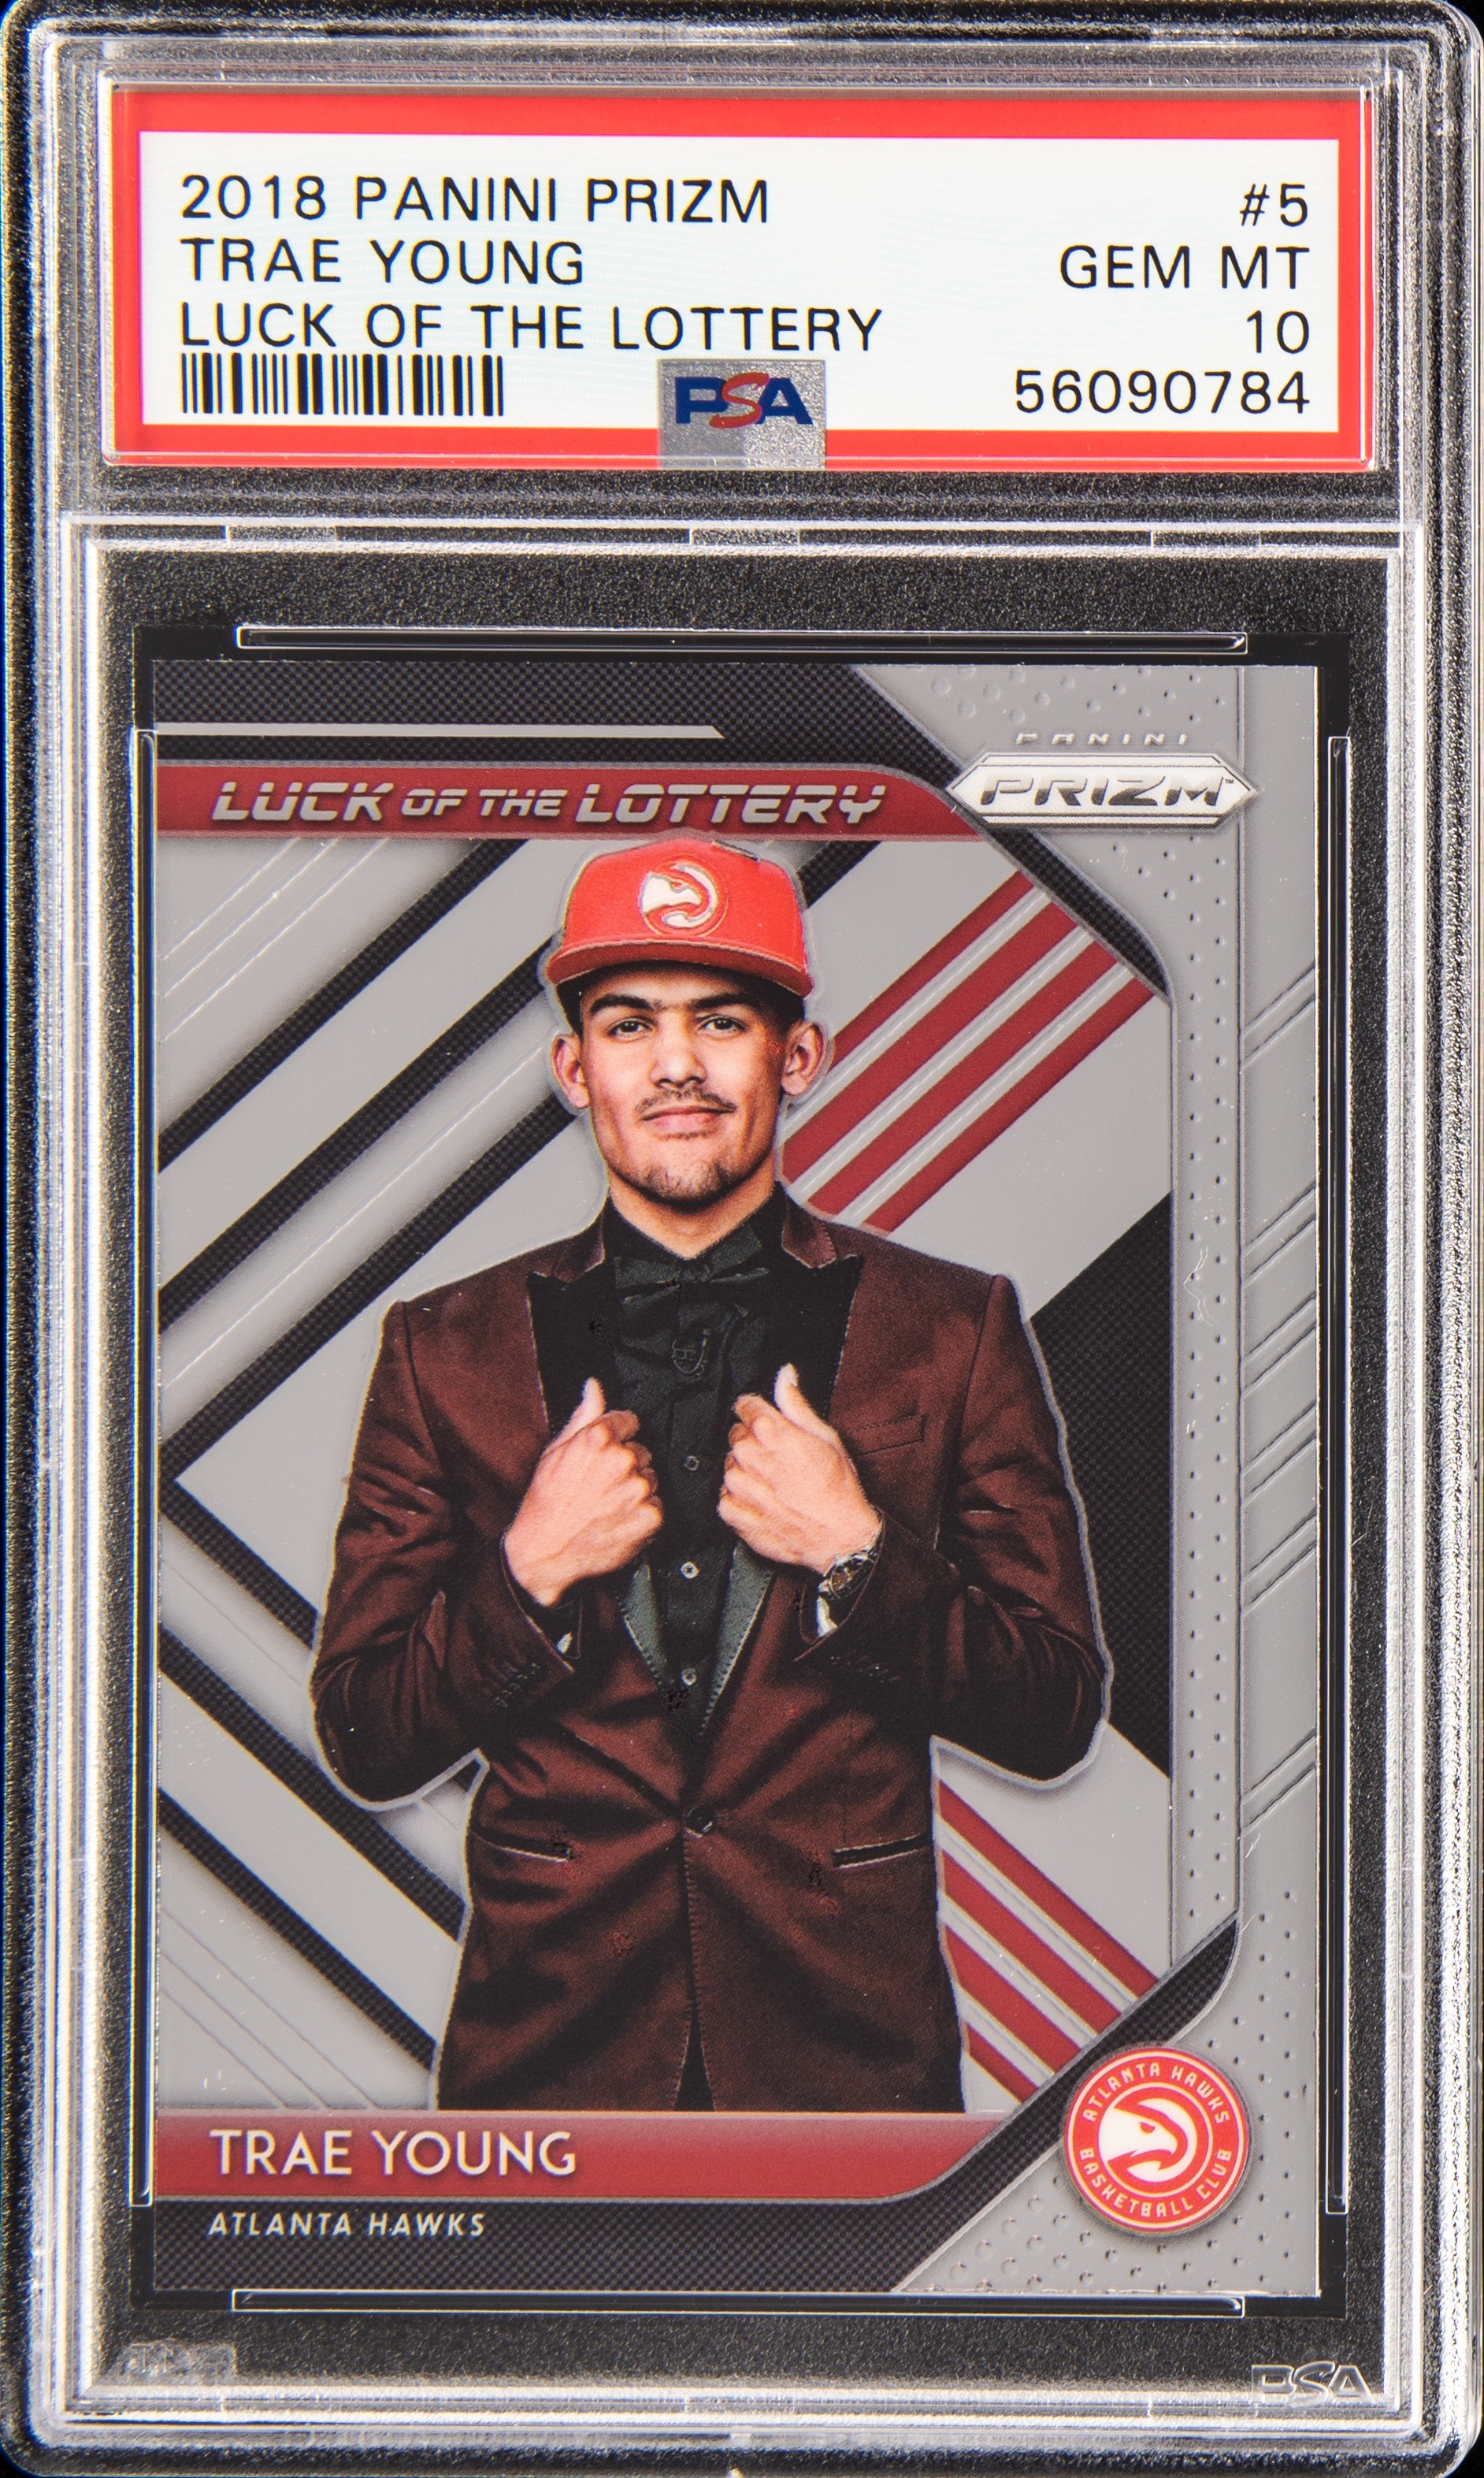 2018-19 Panini Prizm Luck Of The Lottery #5 Trae Young Rookie Card – PSA GEM MT 10